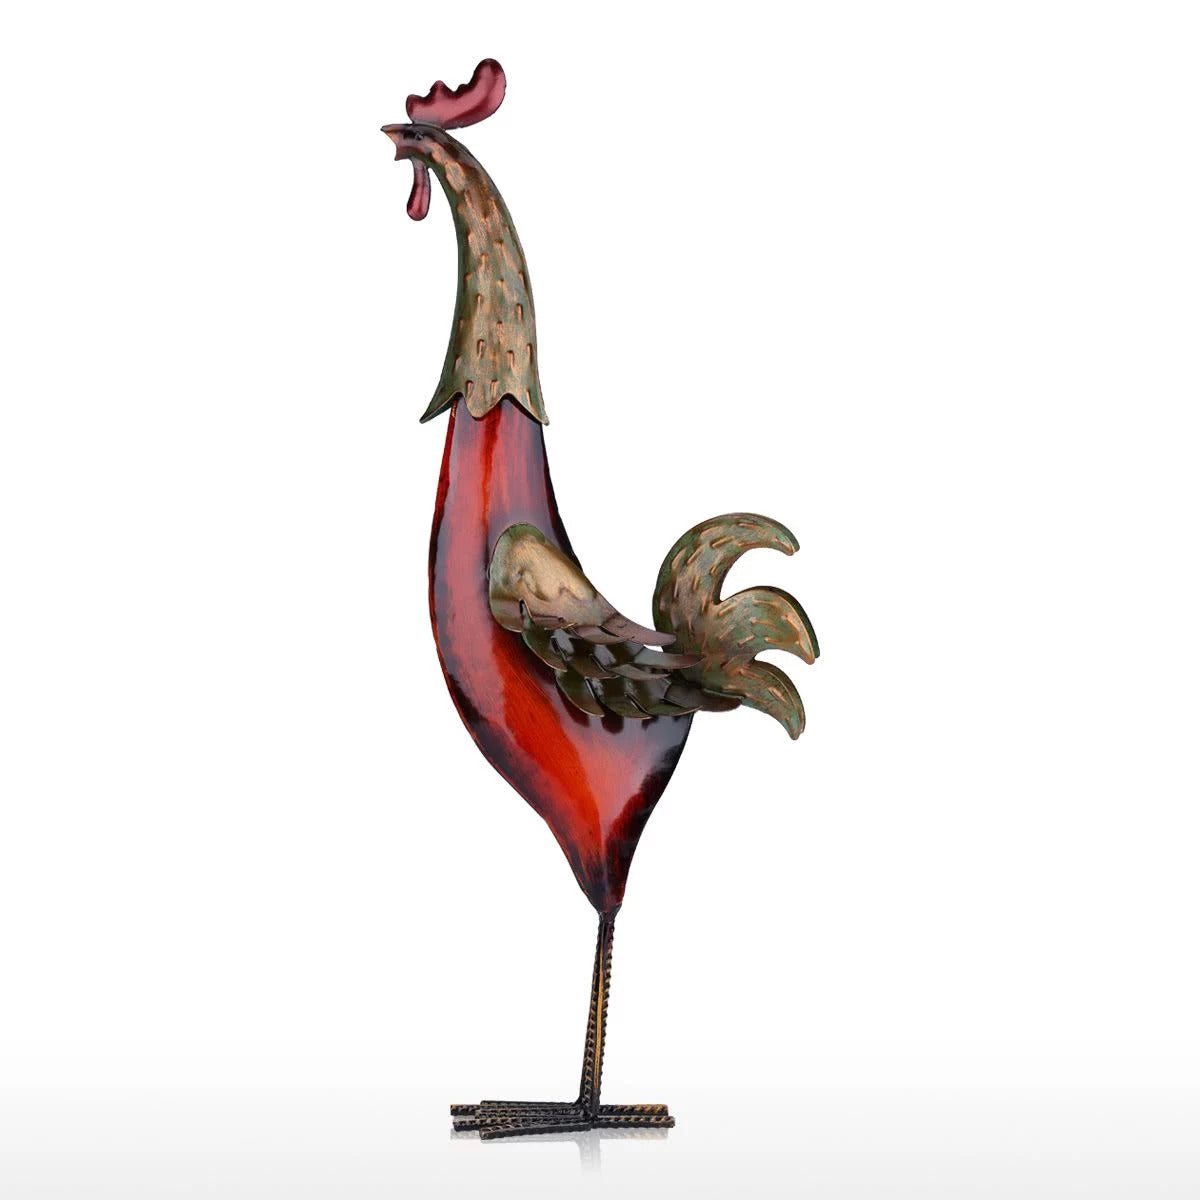 Metal Rooster Statues For Kitchen Decor & Gifts inspired by Christmas